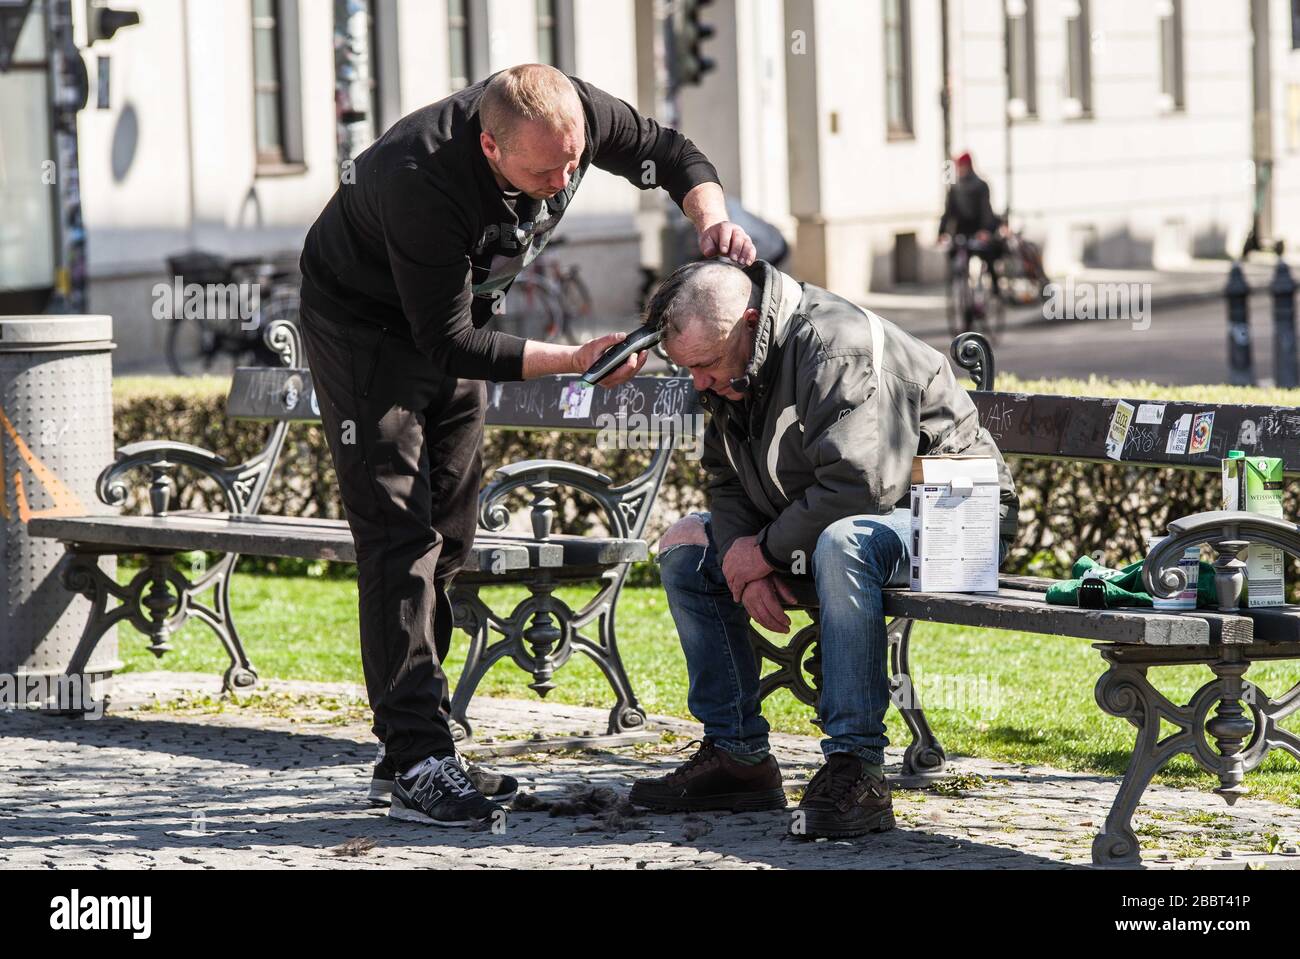 Munich, Bavaria, Germany. 1st Apr, 2020. A man at Munich's Gaertnerplatz gives another a haircut. It is unclear if this is allowed under the Kontaktsperre rules. Despite being cautiously optimistic regarding the efforts to flatten the curve, Parts of Germany, such as Bavaria, have announced extensions to the daily life restrictions at least until April and with certain portions extending beyond. Credit: Sachelle Babbar/ZUMA Wire/Alamy Live News Stock Photo